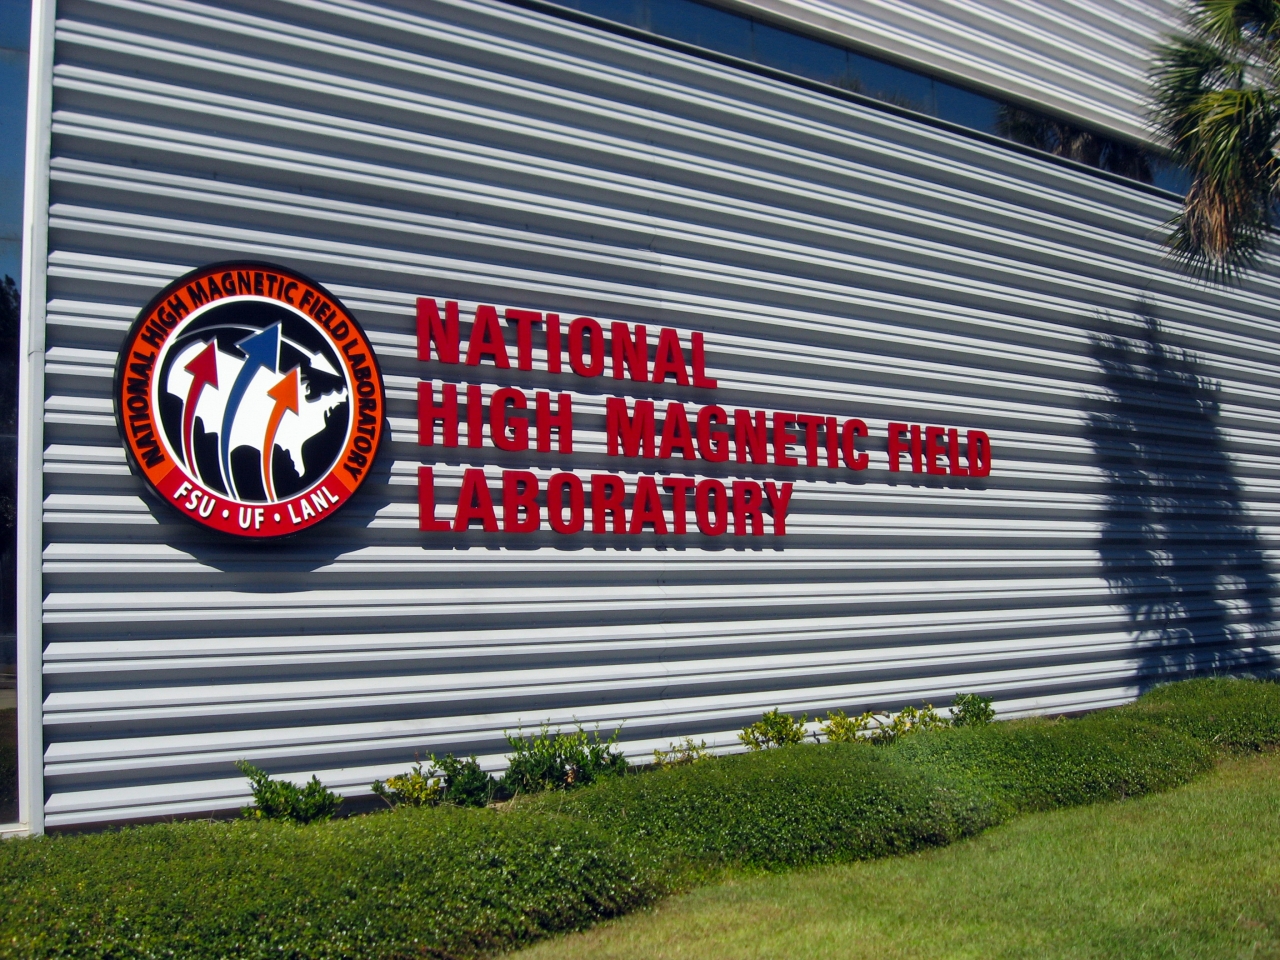 NHMFL seal and sign on the building exterior.